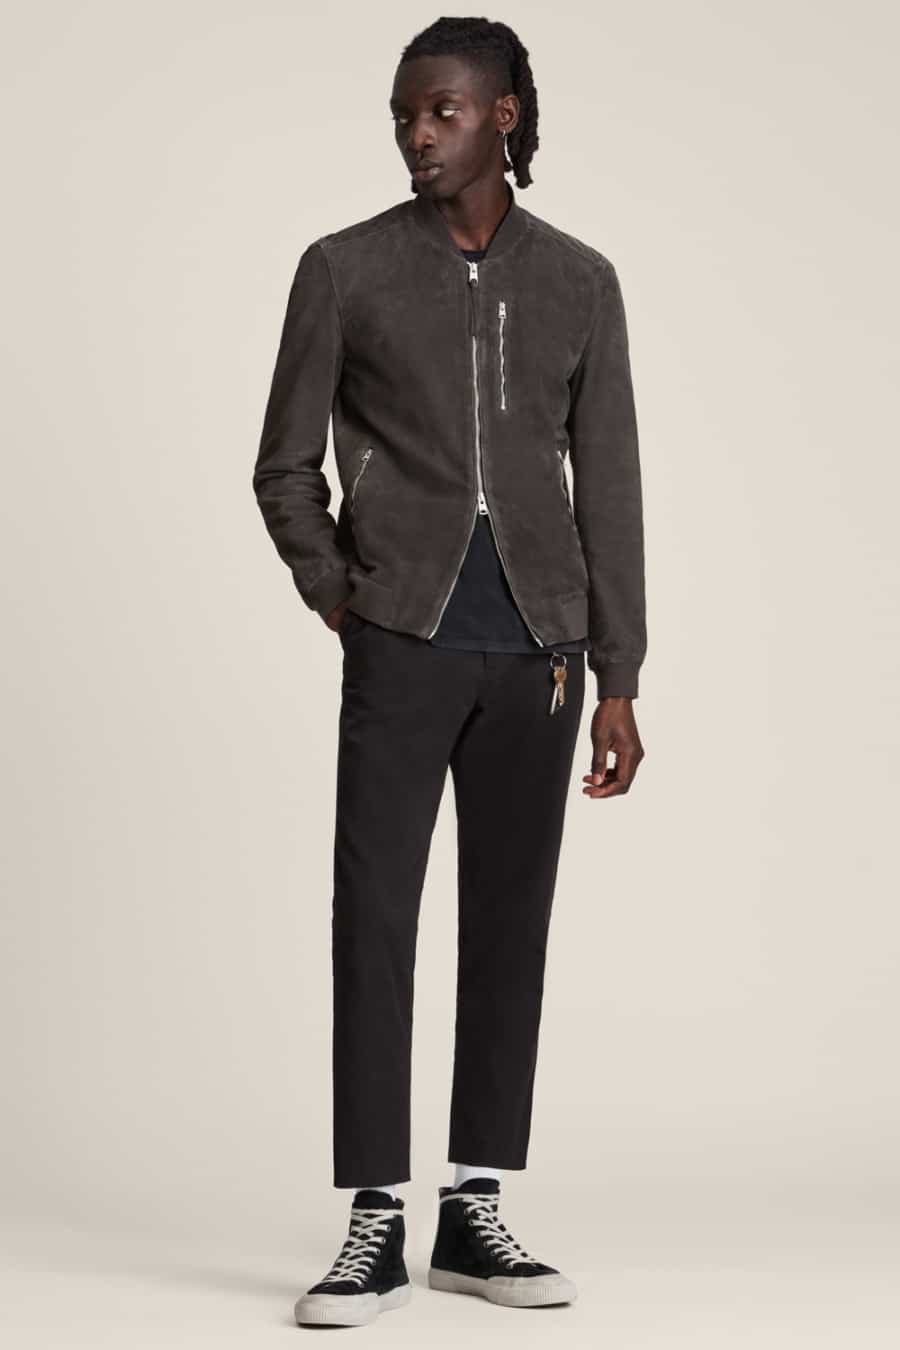 Men's black cropped chinos, black T-shirt, charcoal suede bomber jacket and black canvas high-tops outfit